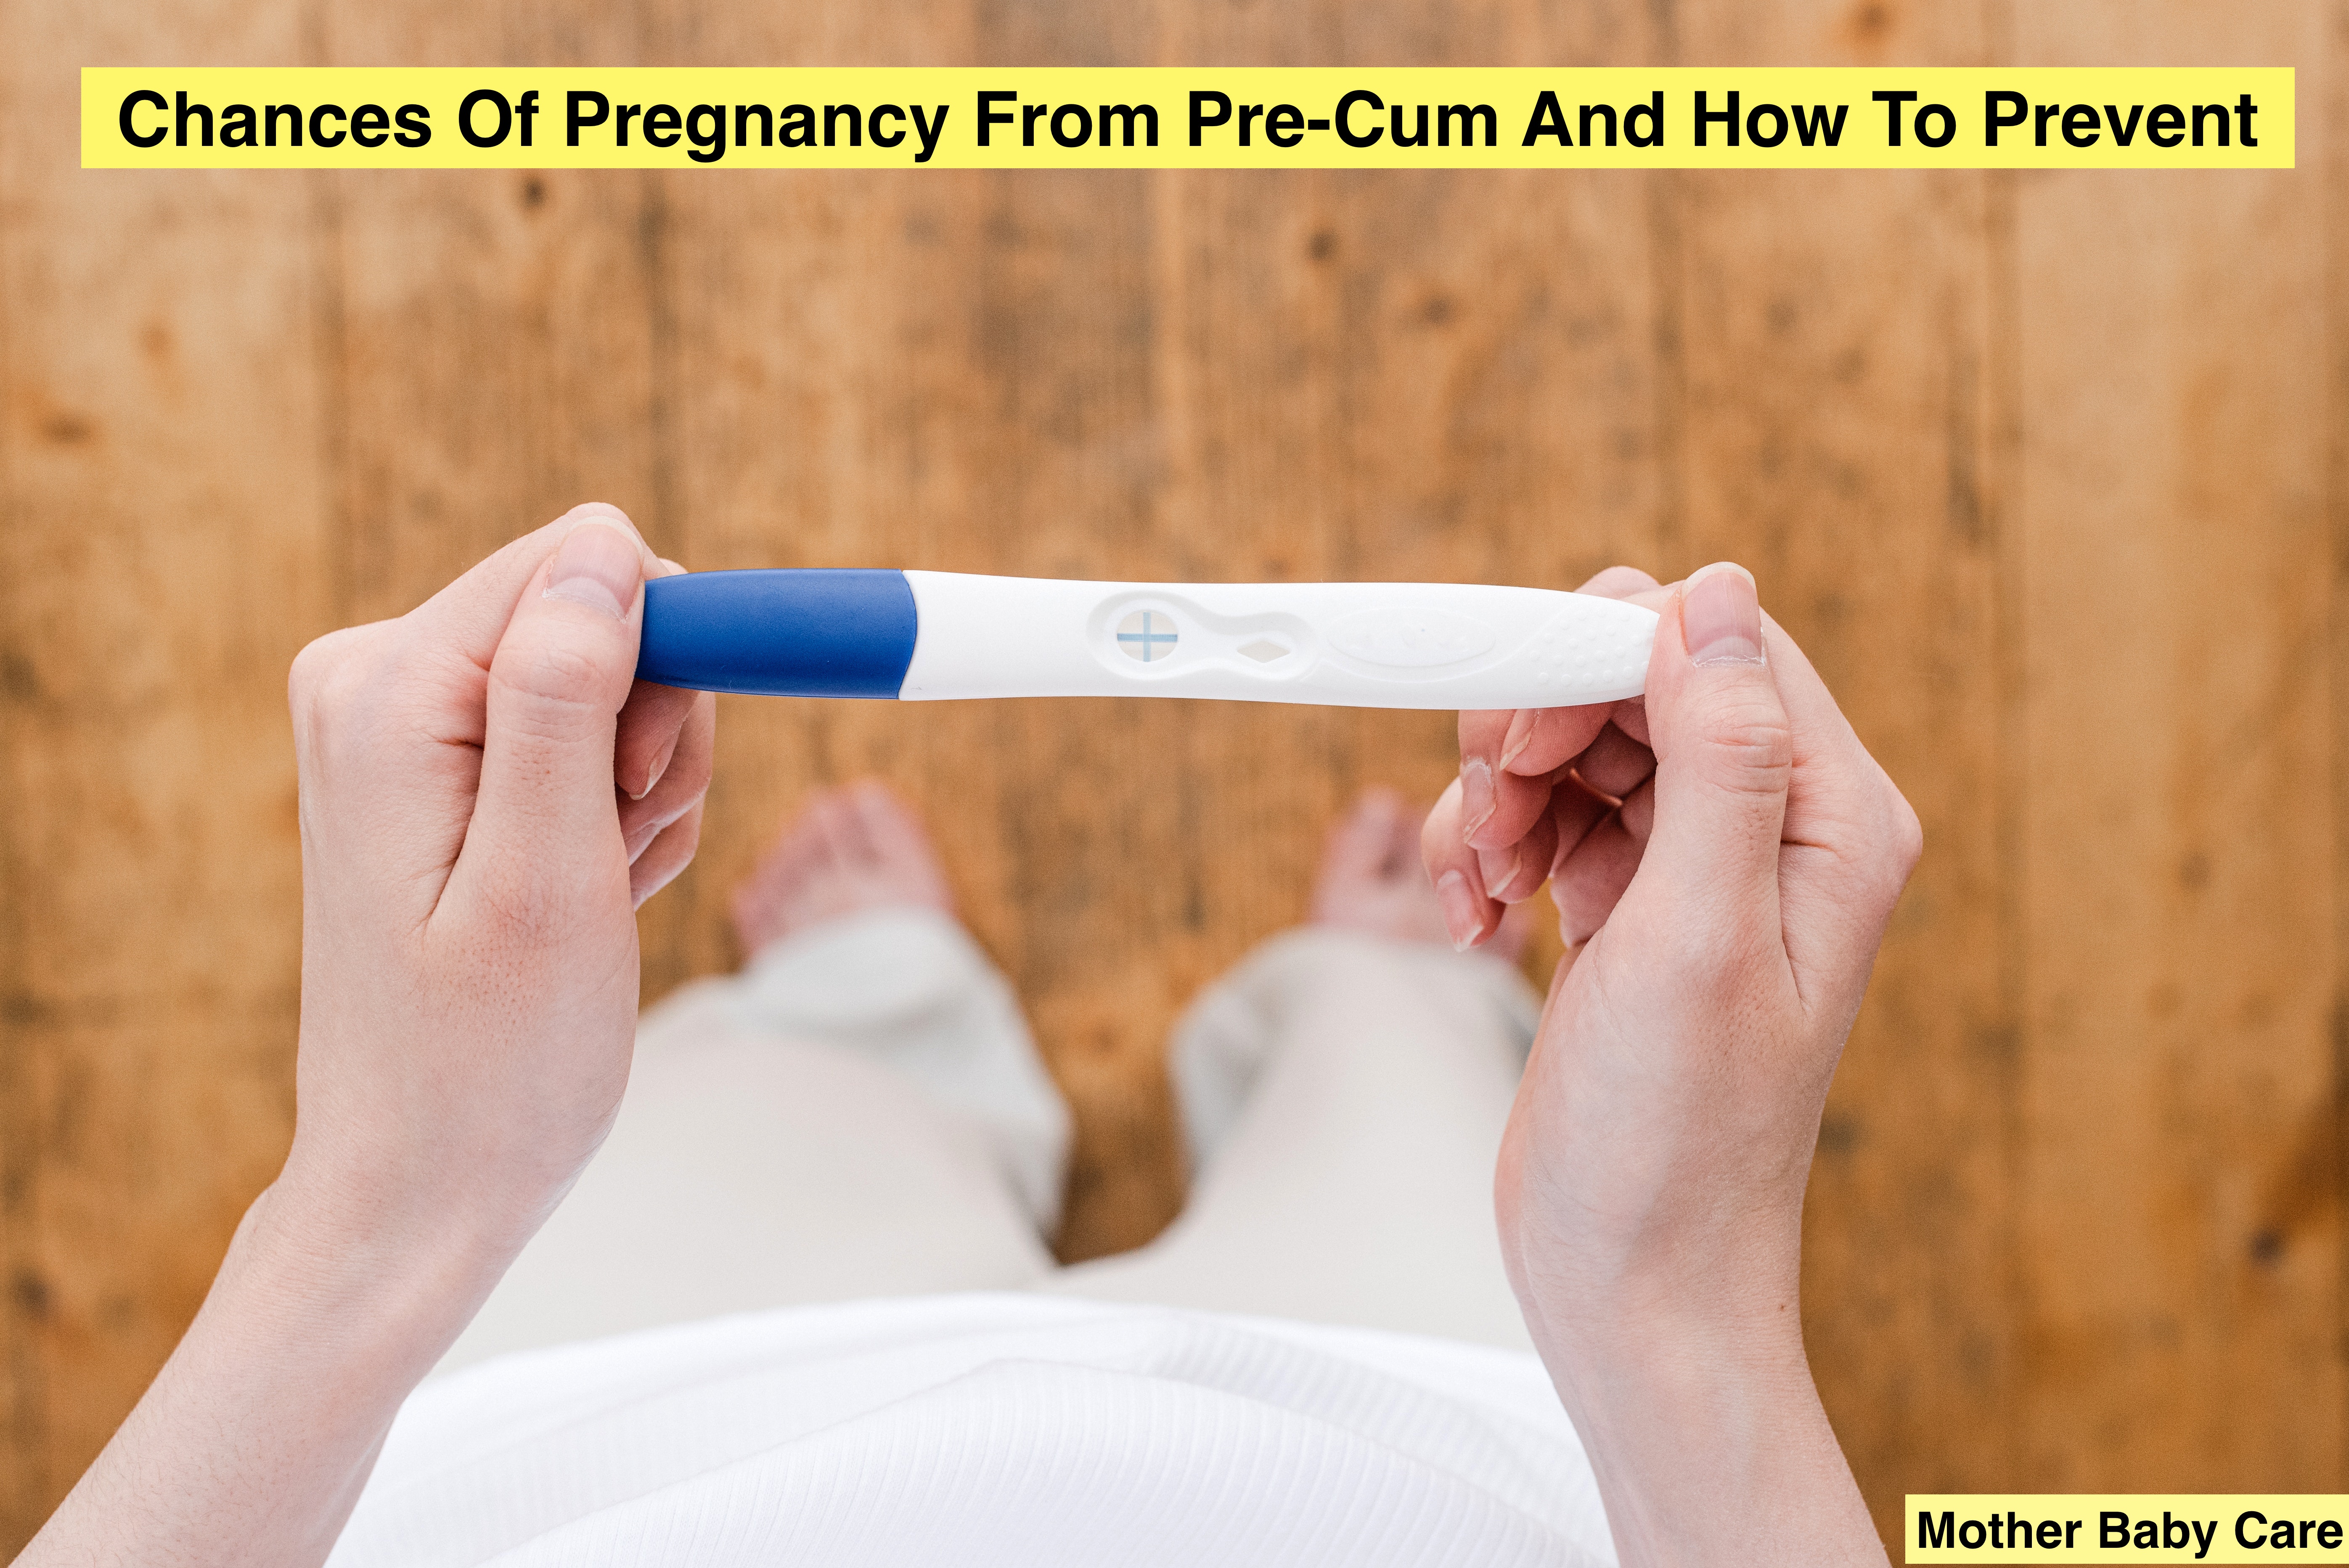 Chances Of Pregnancy From Pre-Cum And How To Prevent